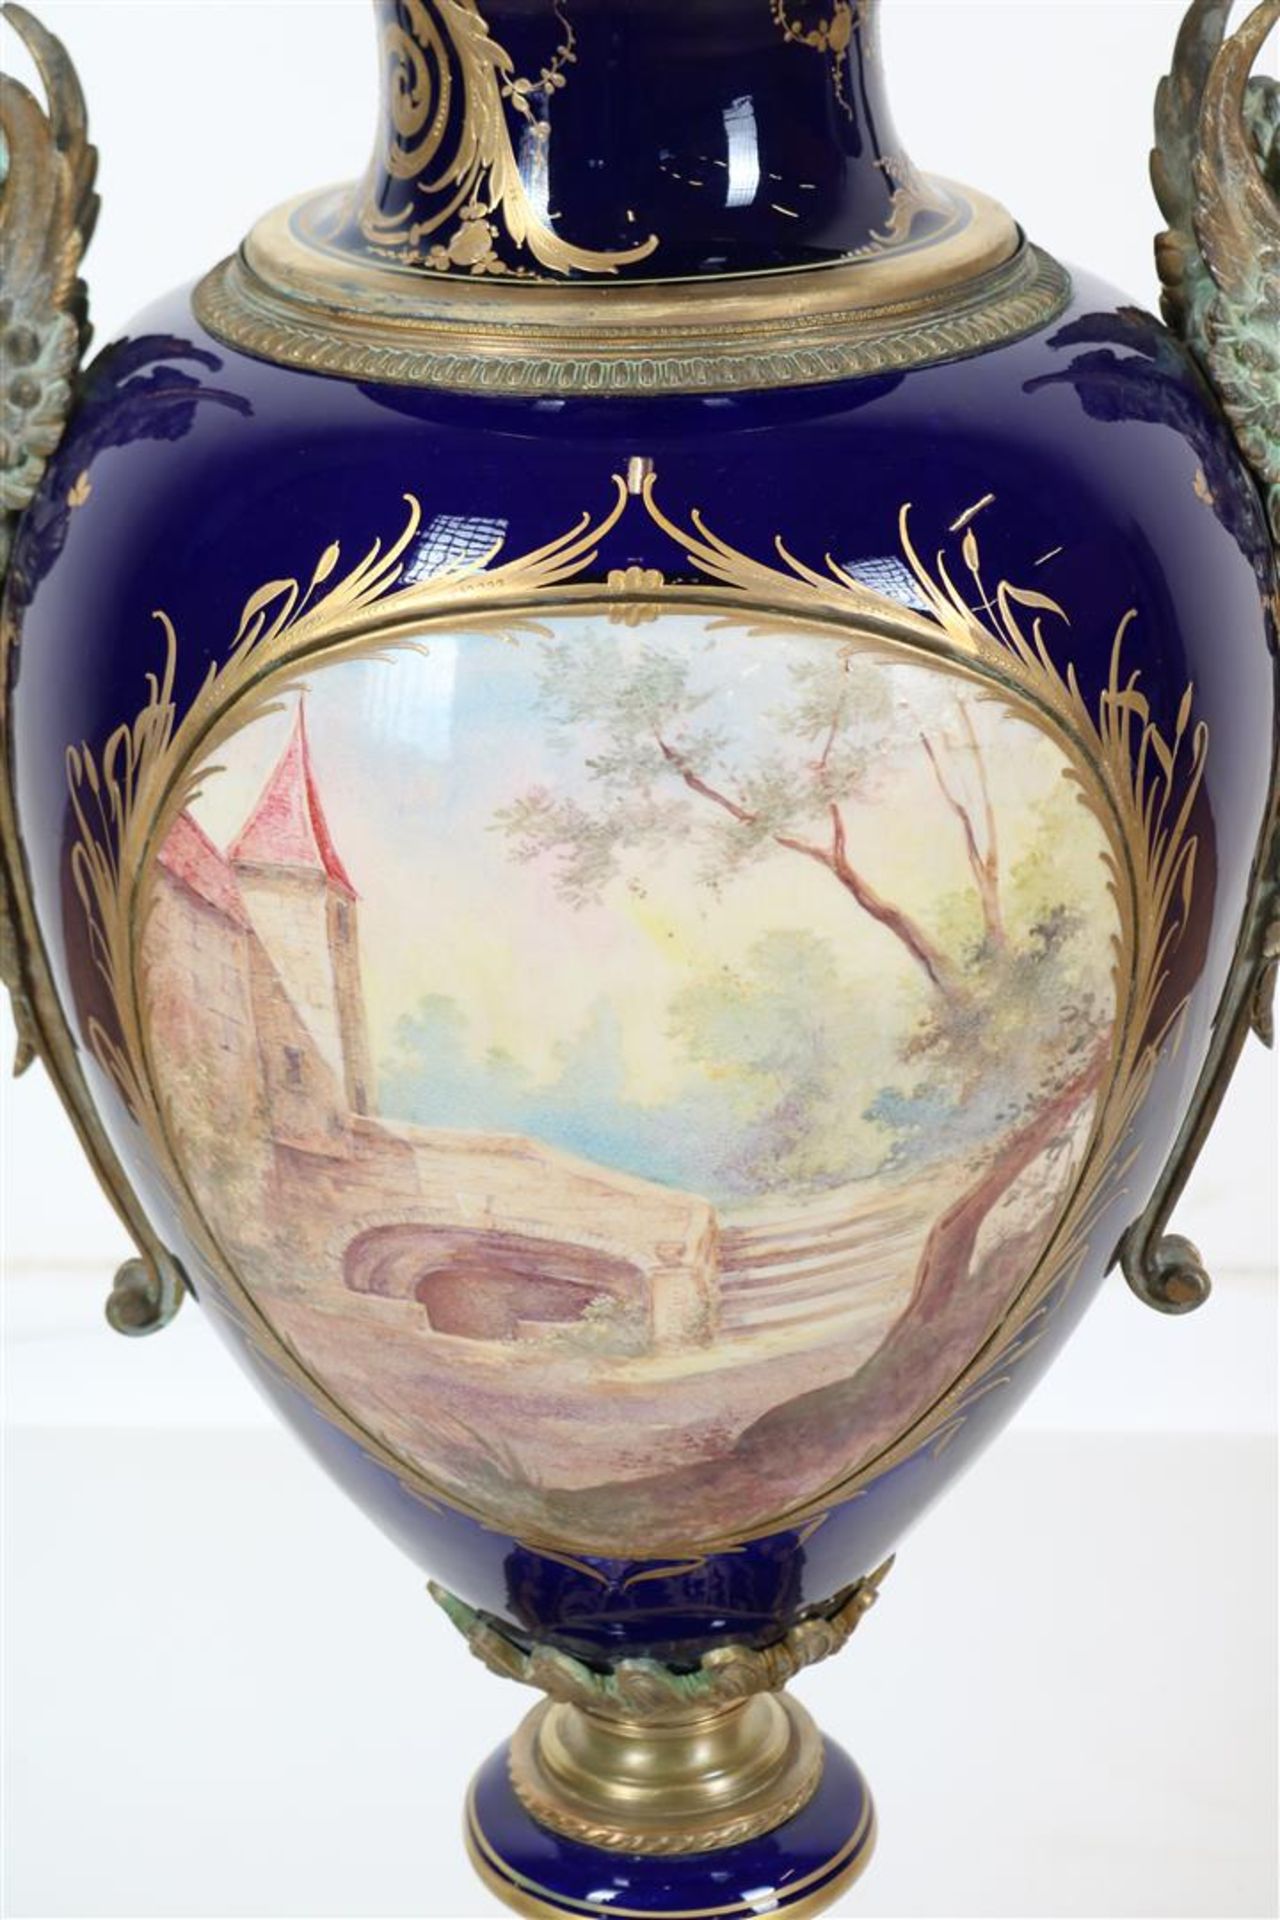 Porcelain Sevres urn vase with fixed lid, double painted decor of romantic scene of figures in - Image 7 of 8